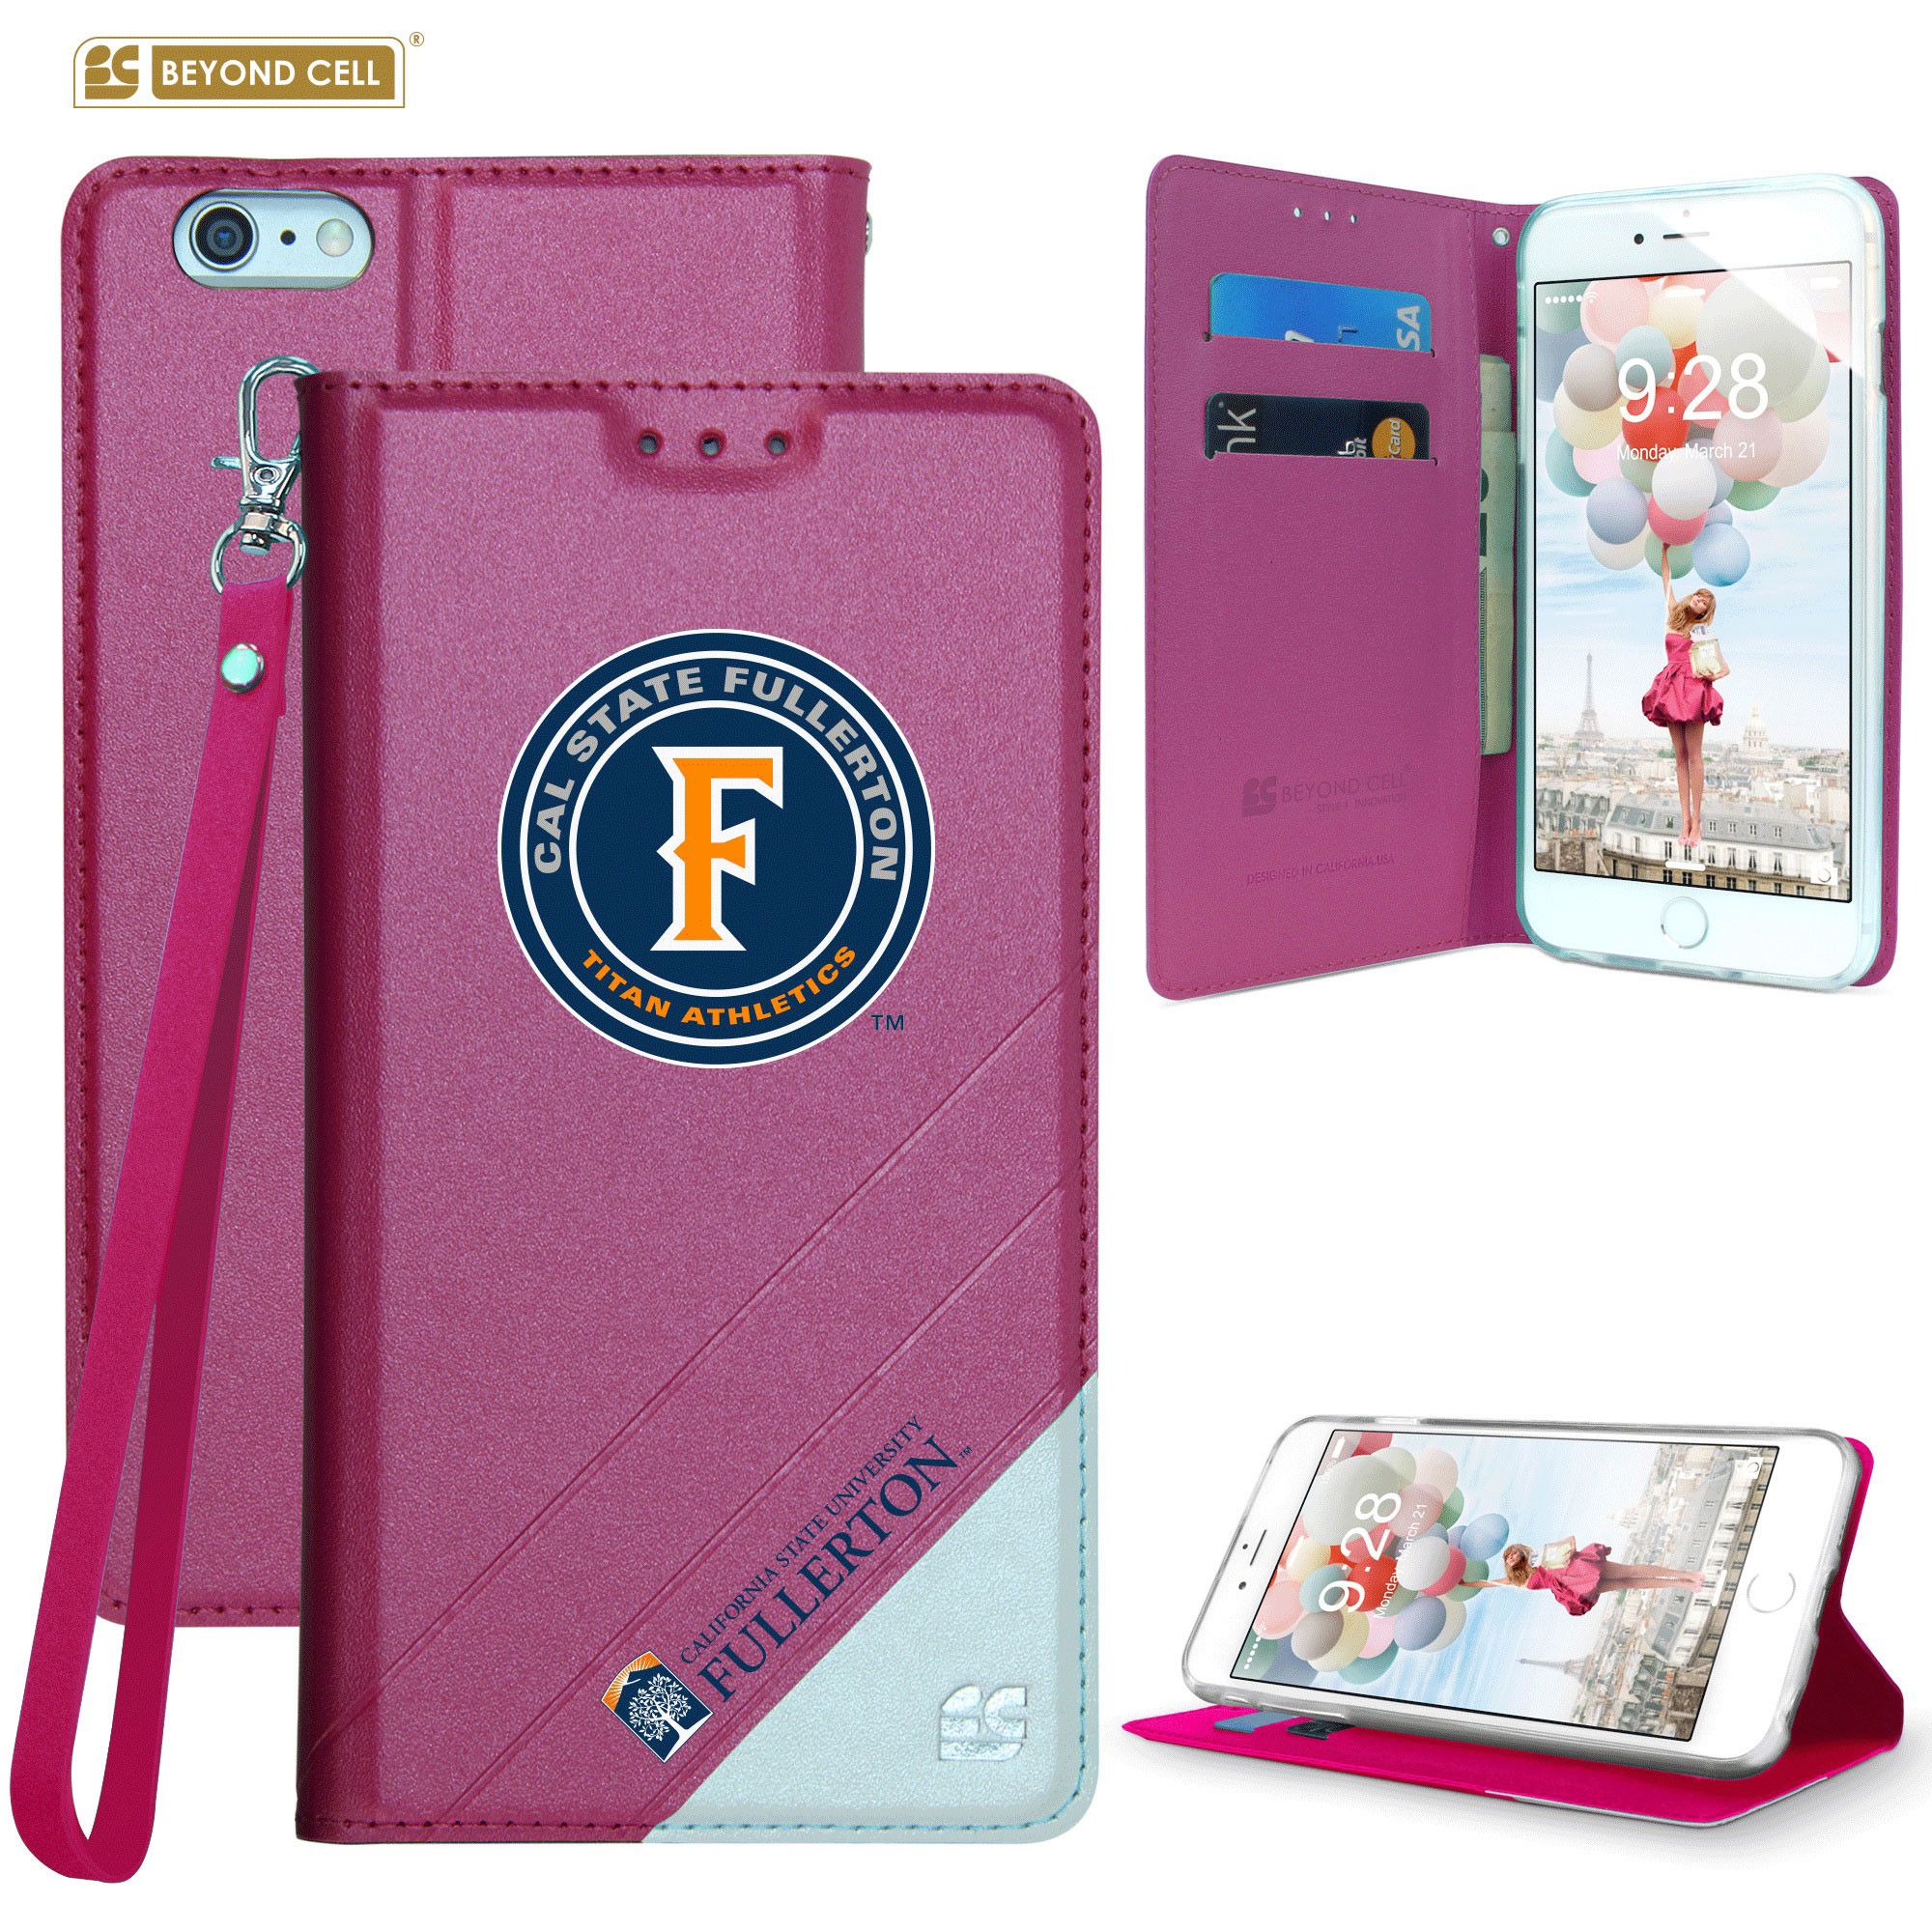 Apple iPhone 6/6s - Licensed Cal State Fullerton Folding Wallet case with card slots and wristlet, Hot Pink